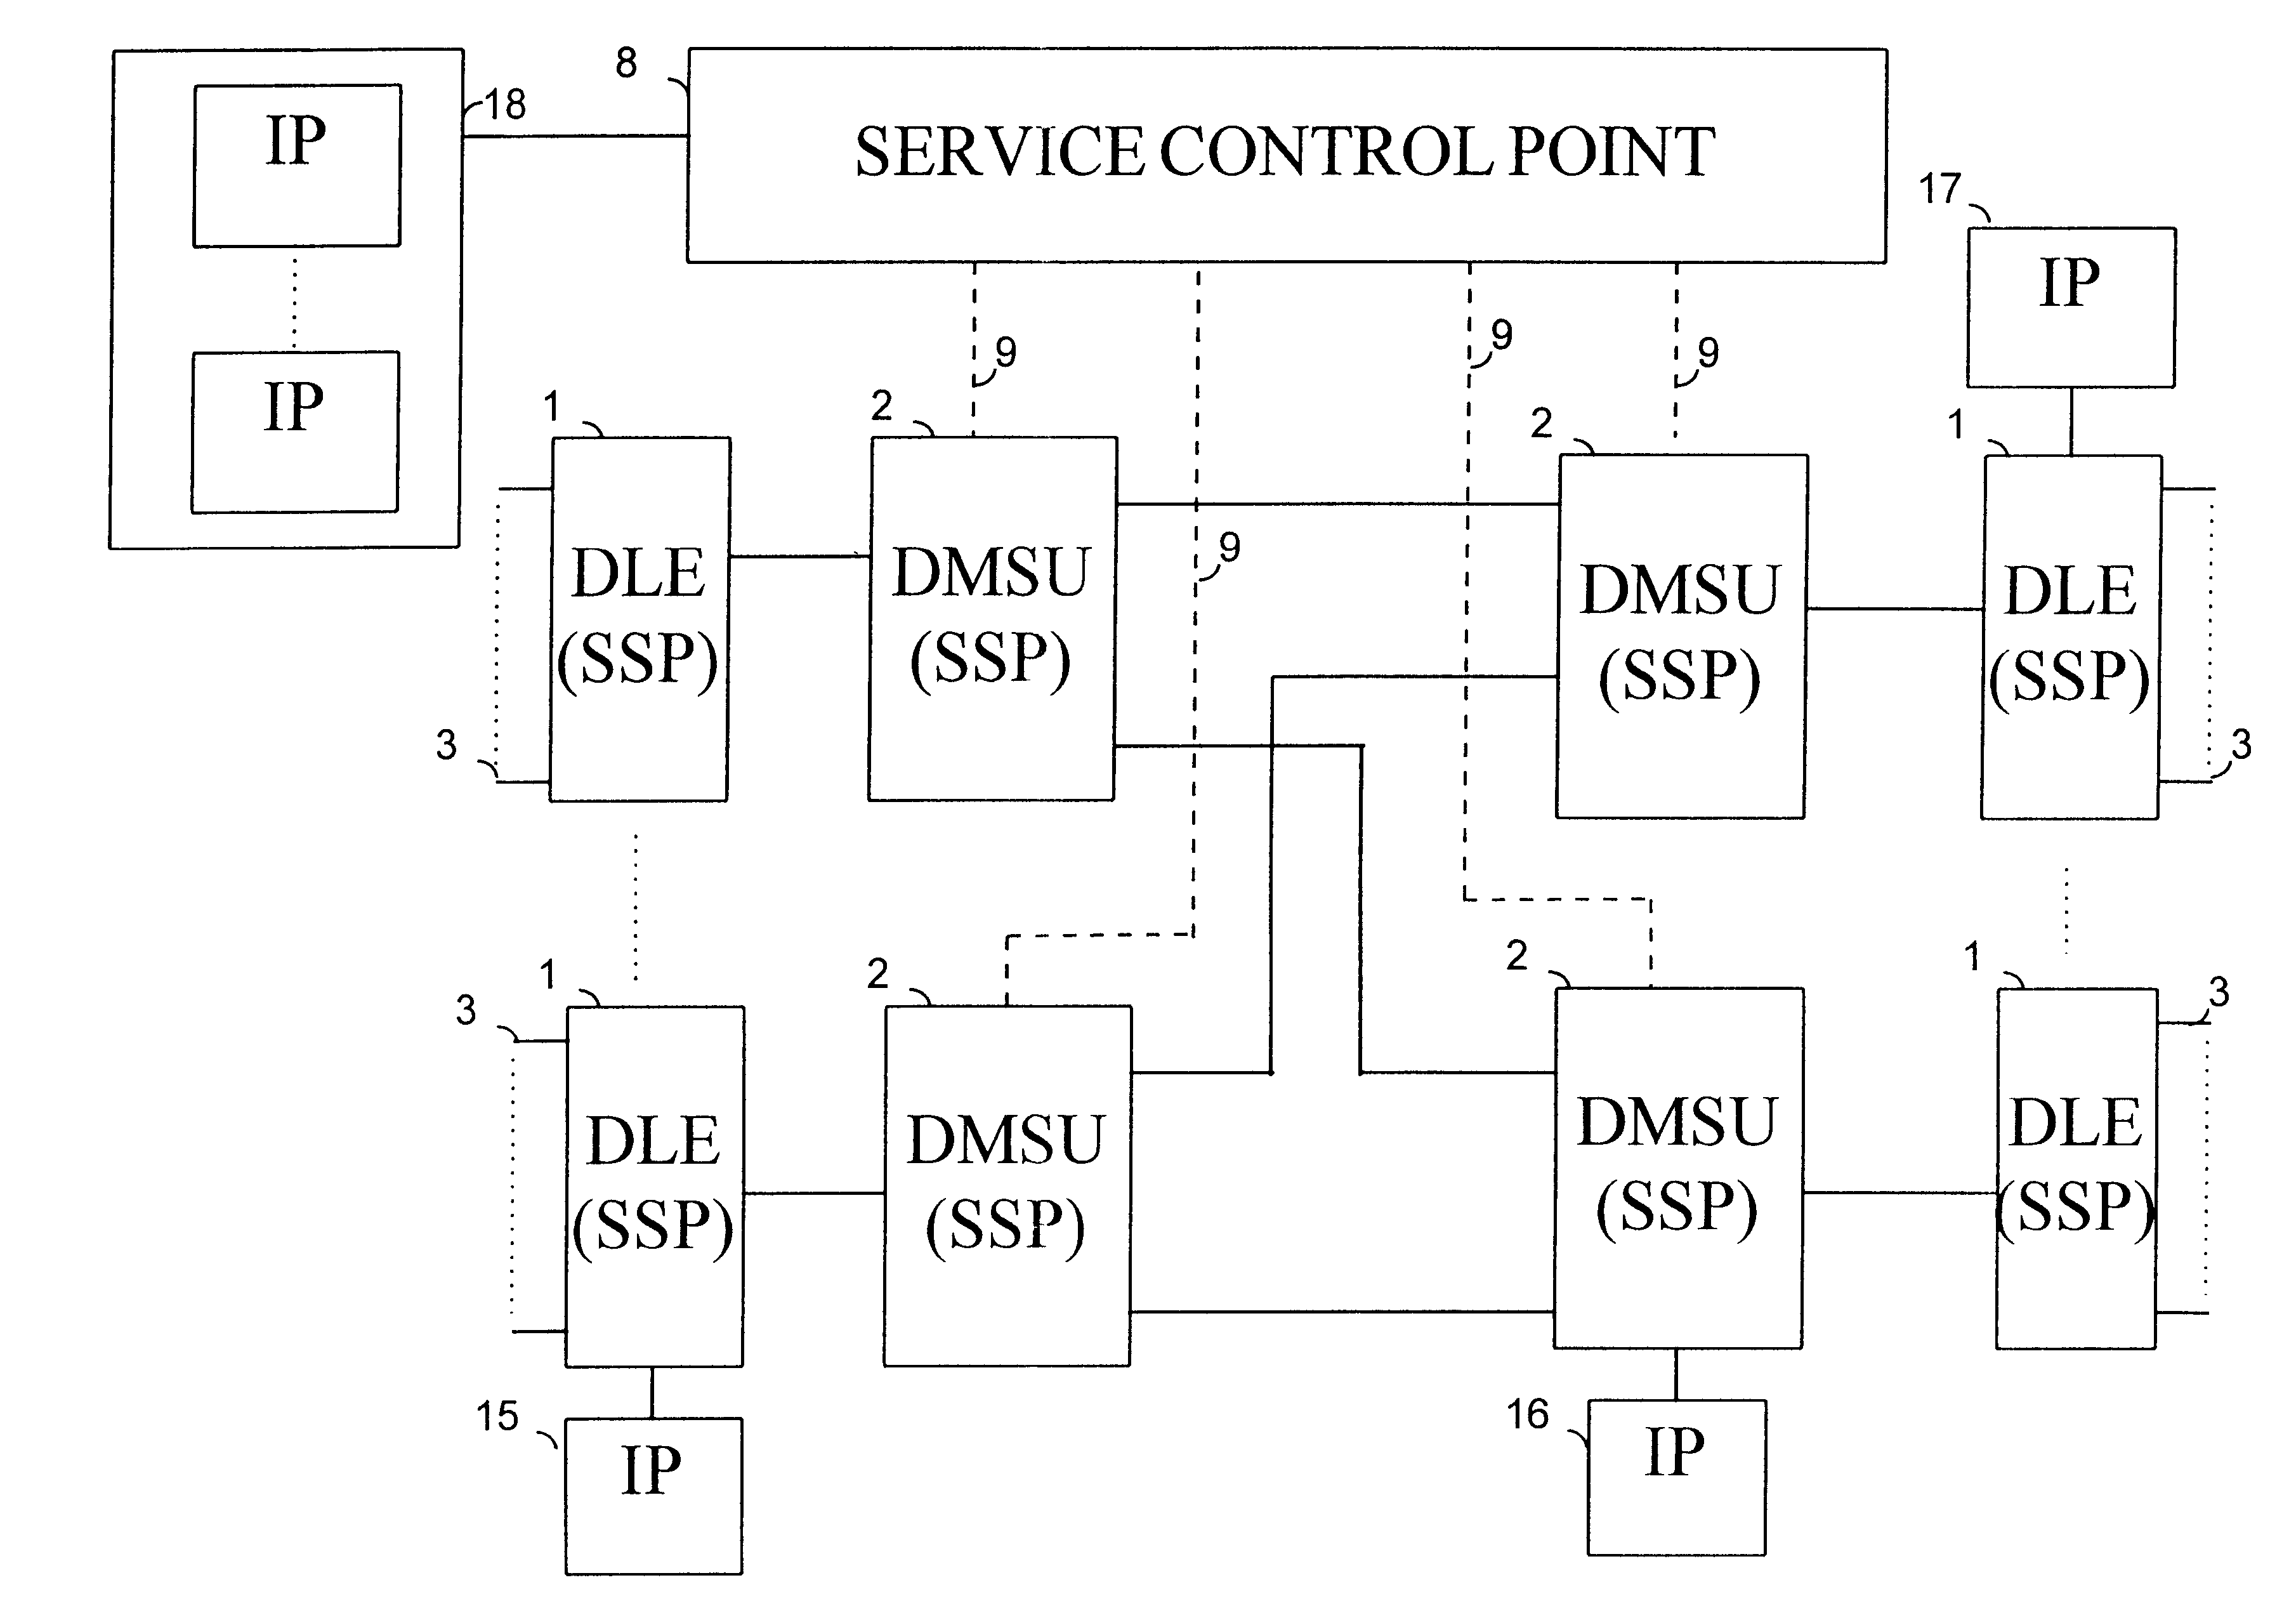 System for controlling telecommunication overload traffic